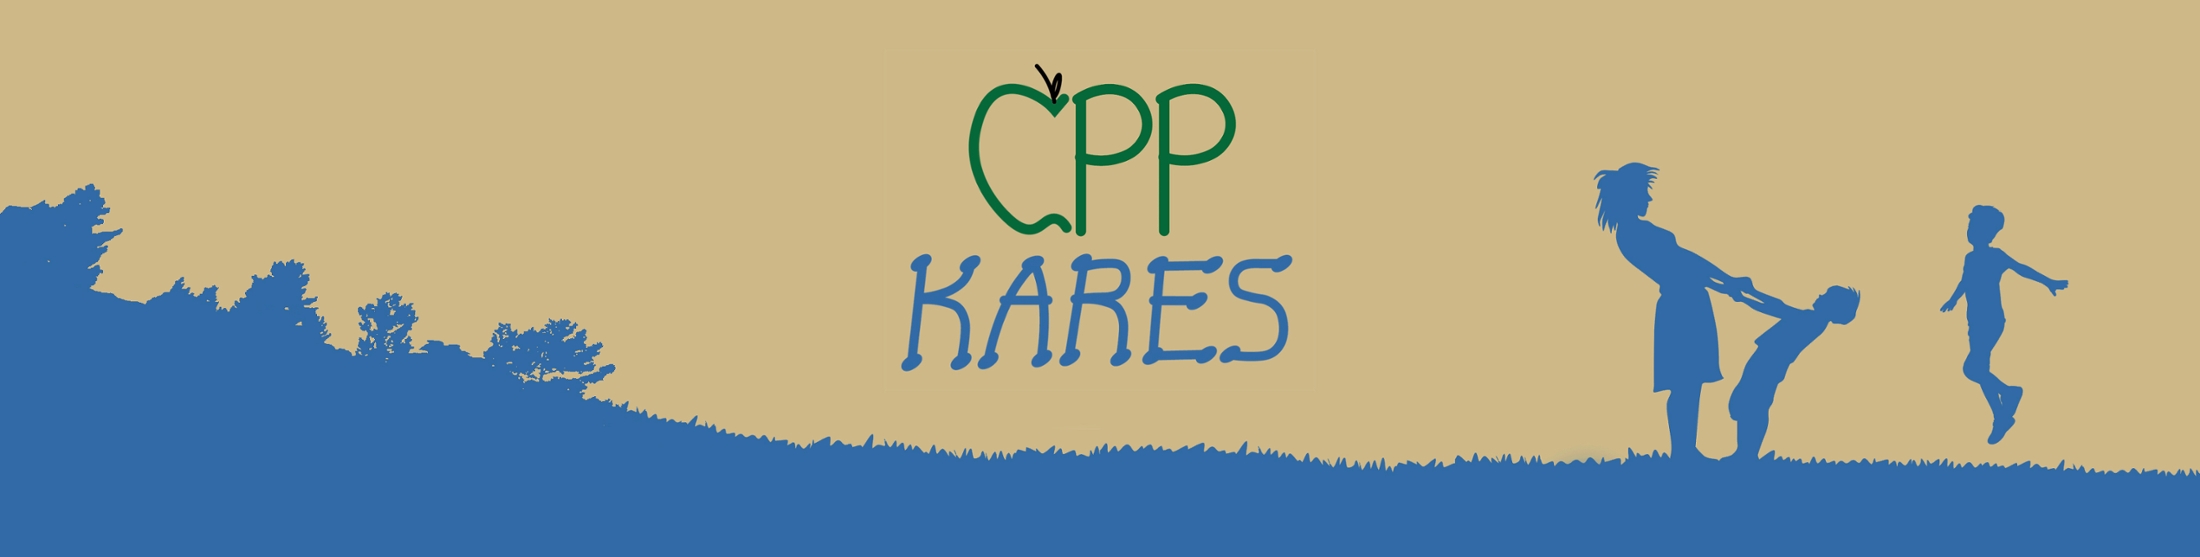 CPPKARES Header Image with logo